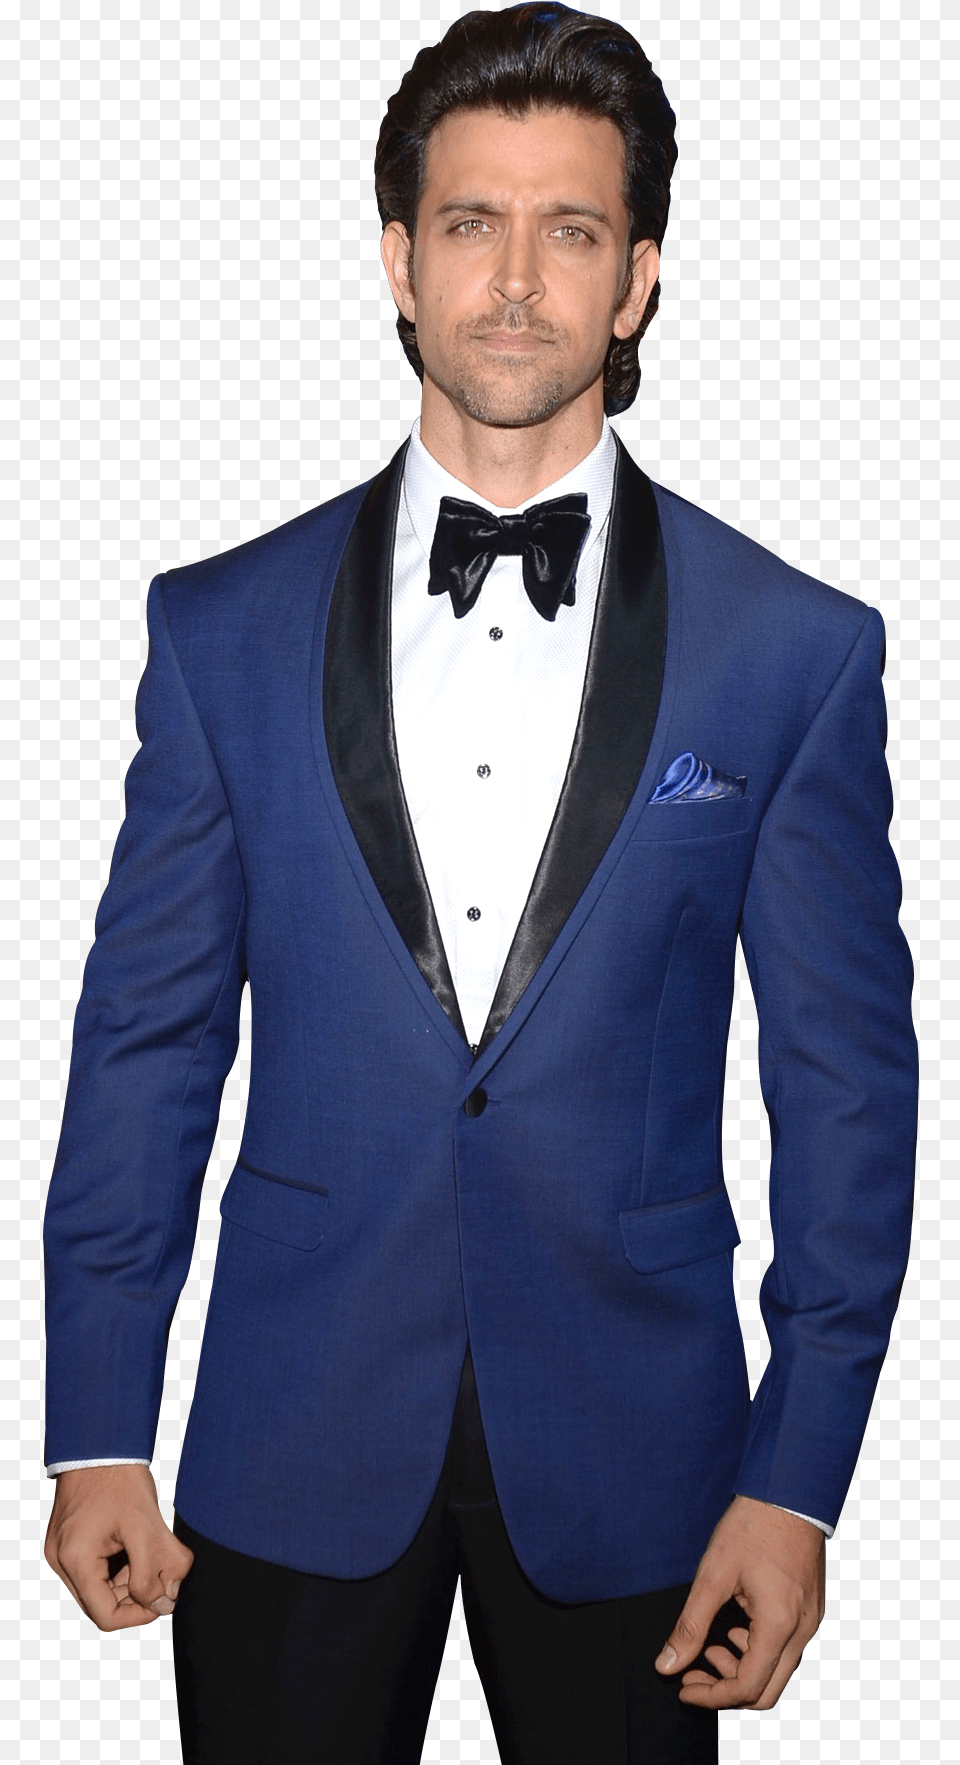 Hrithik Roshan First Movie Name List, Accessories, Tie, Suit, Tuxedo Png